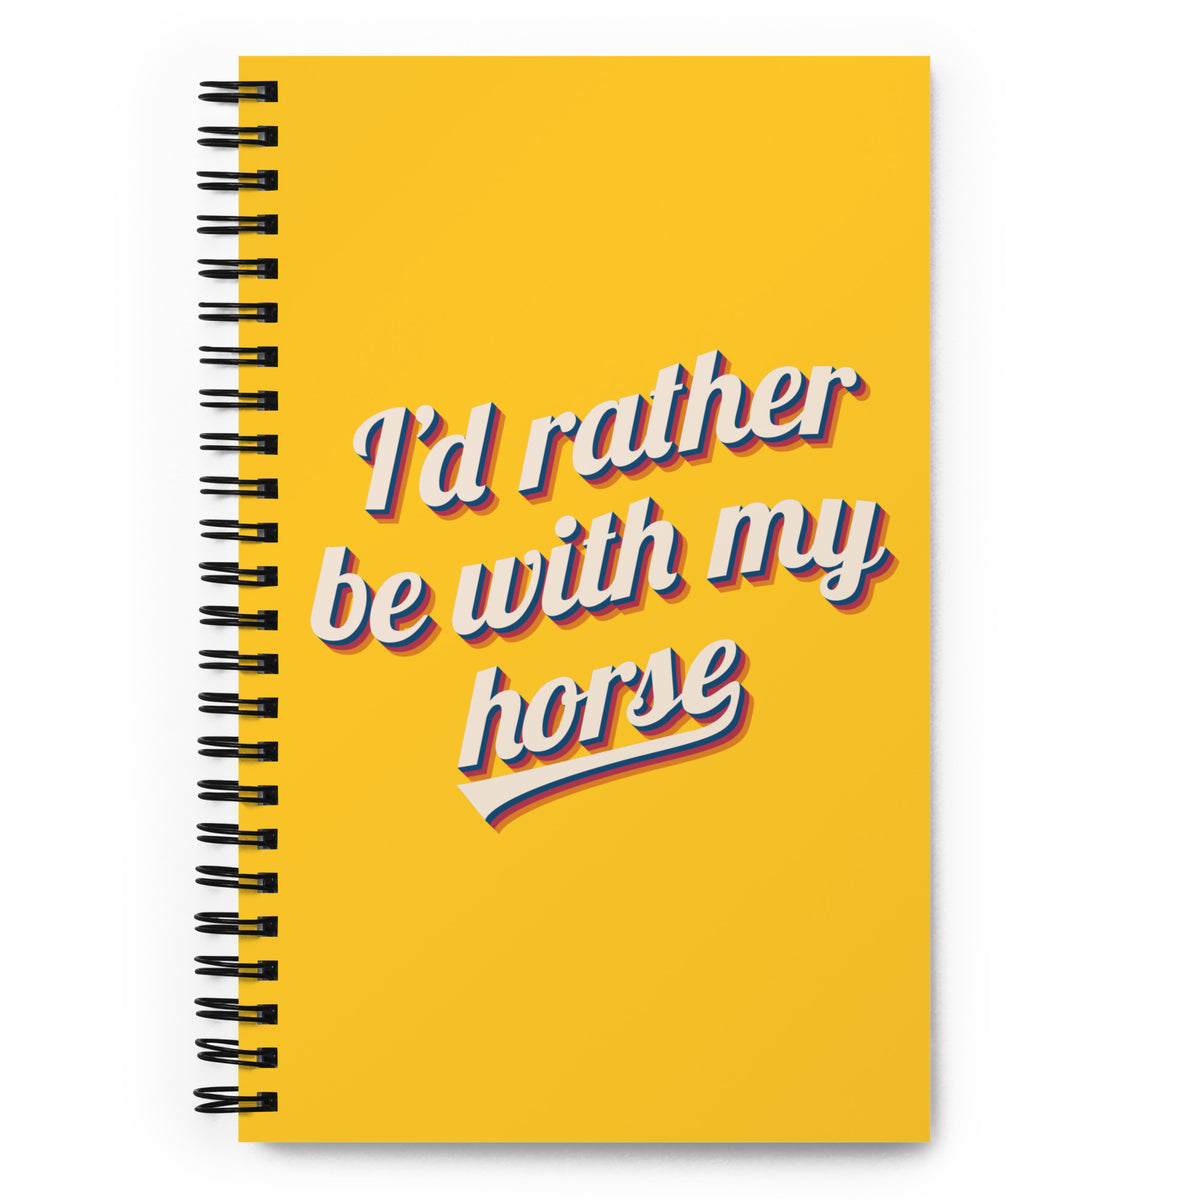 I&#39;d rather be with my horse Spiral notebook FEI Official Store